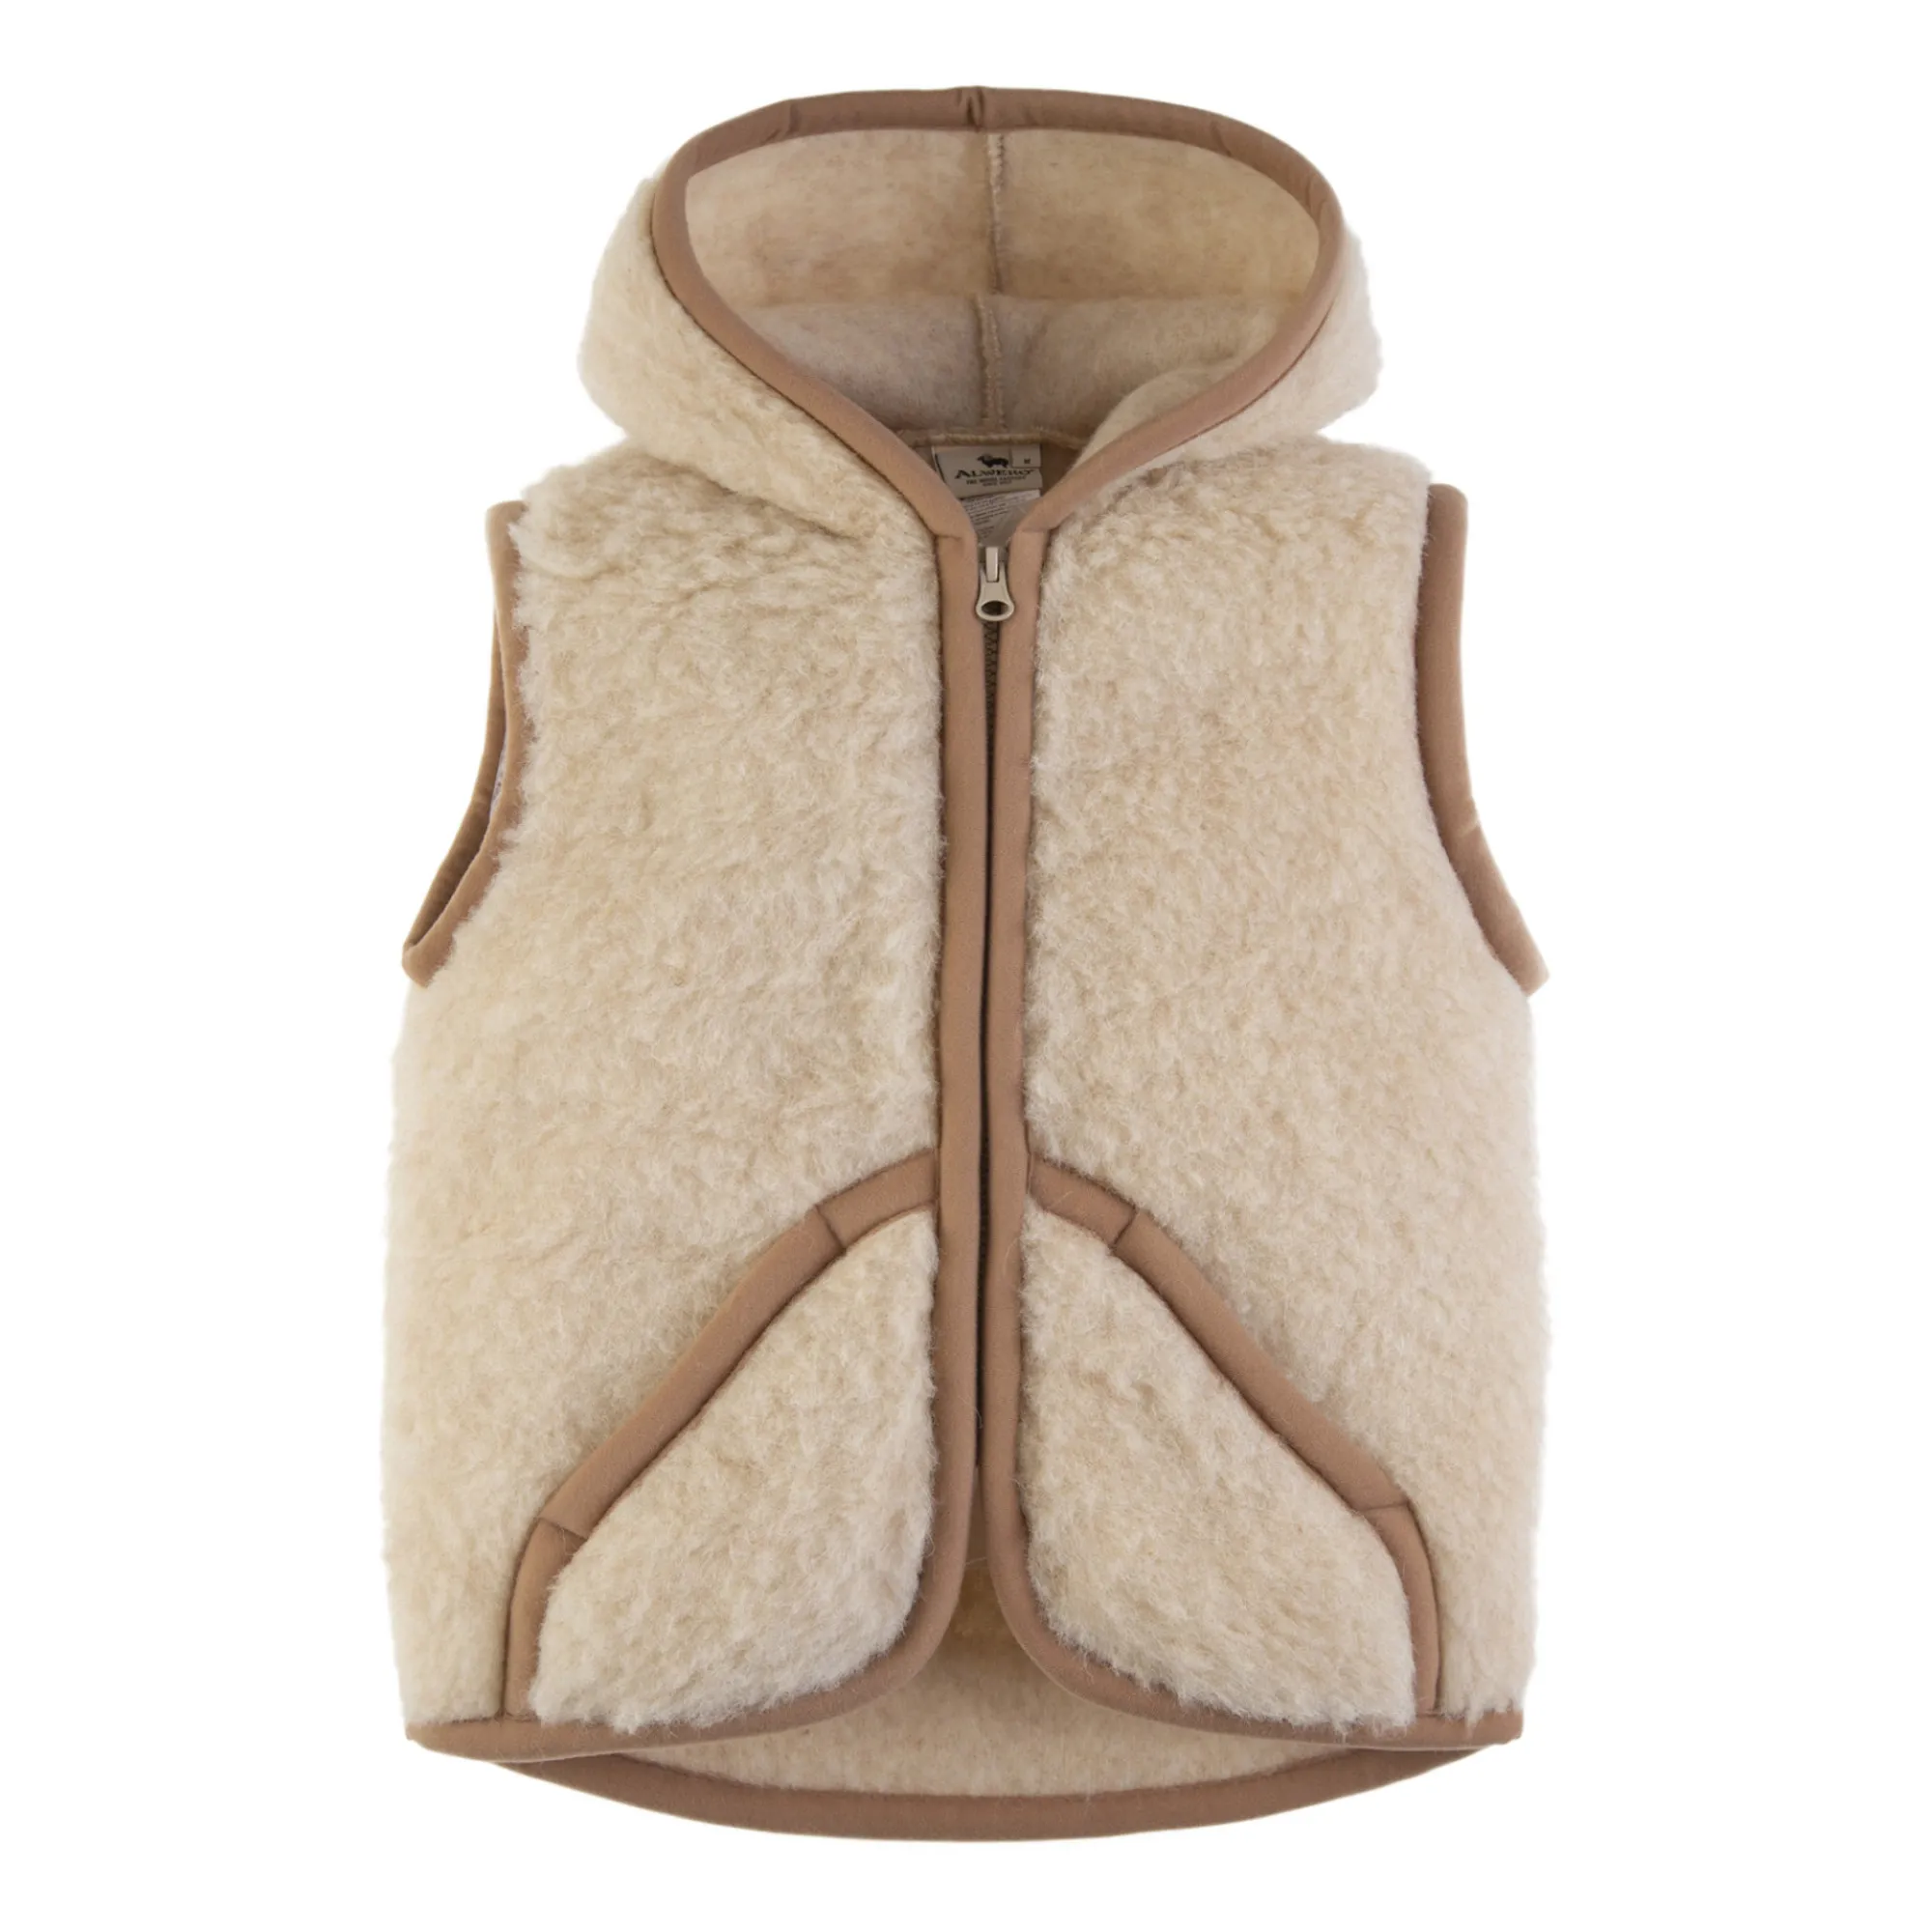 Alwero - Robby Hooded Vest - Beige | Smallable